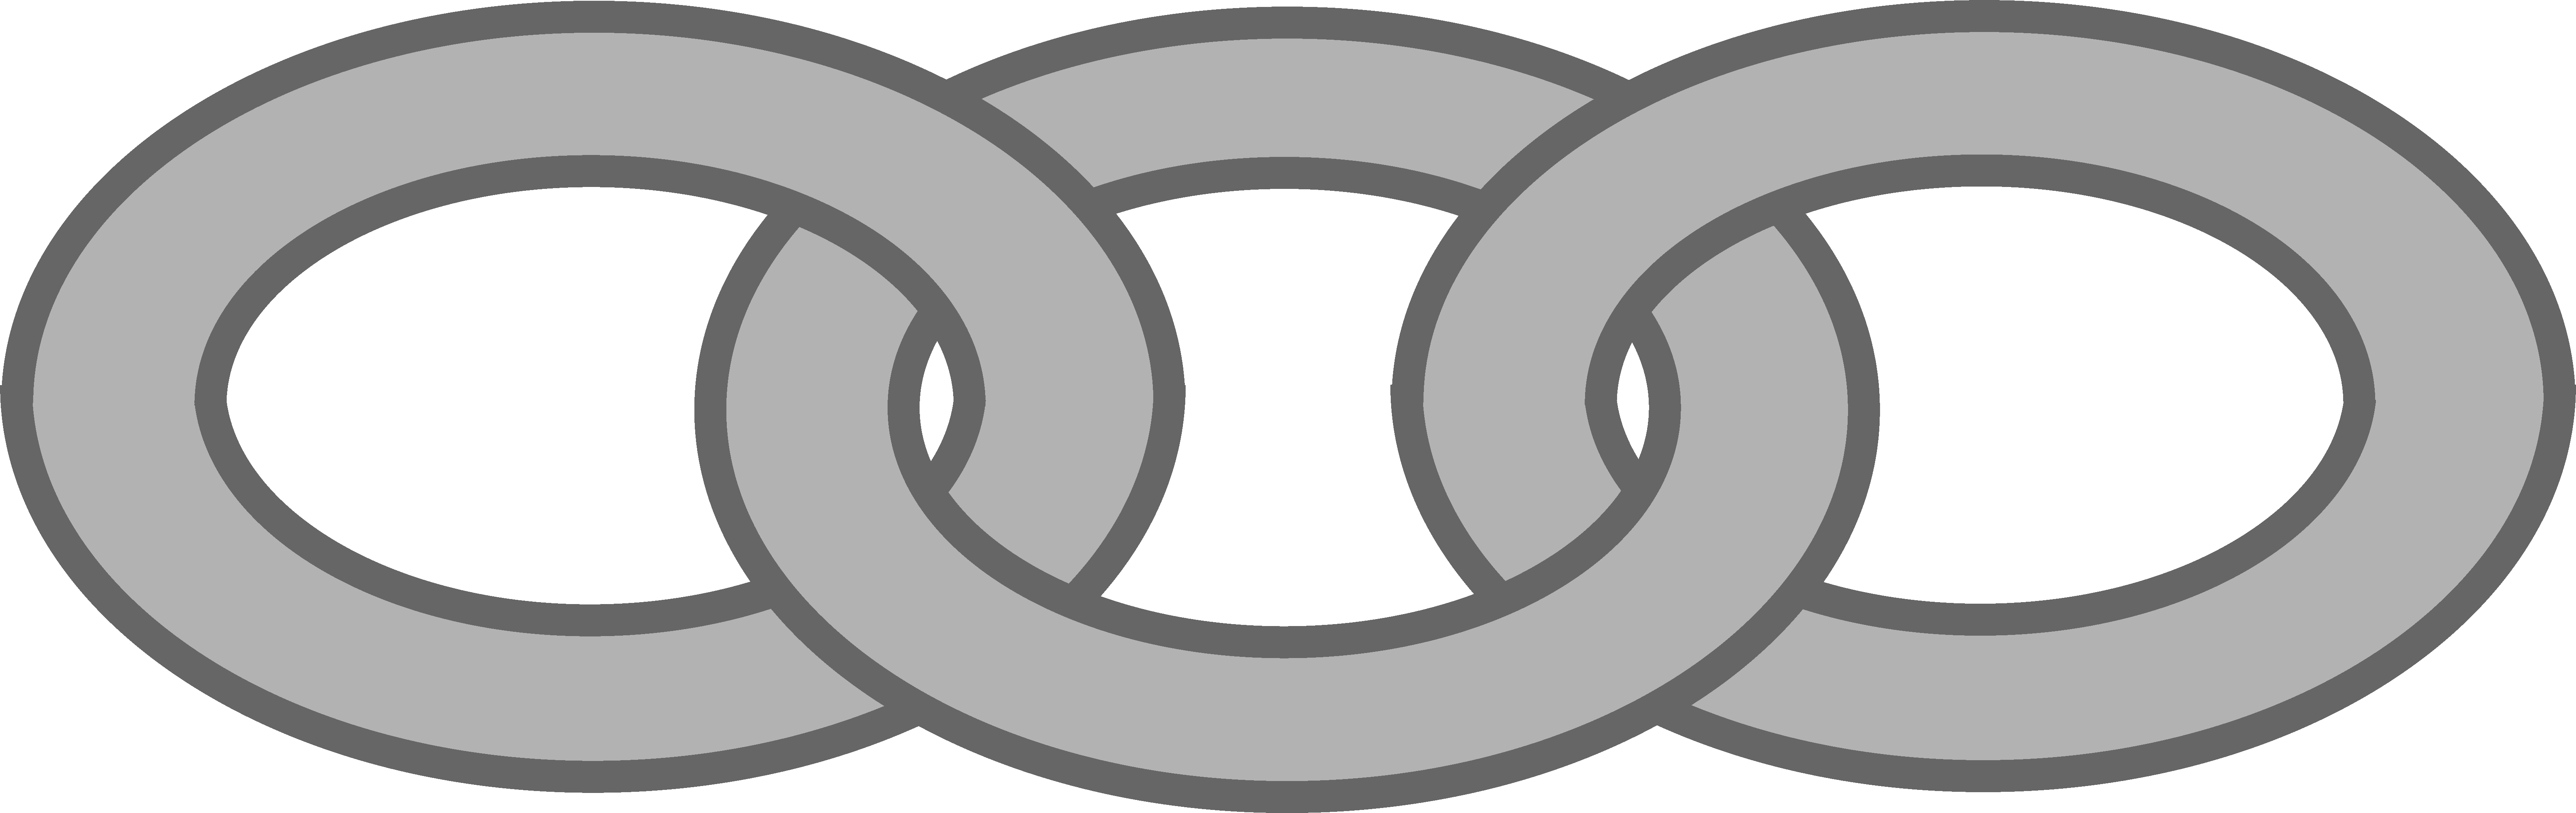 Clipart chain links 